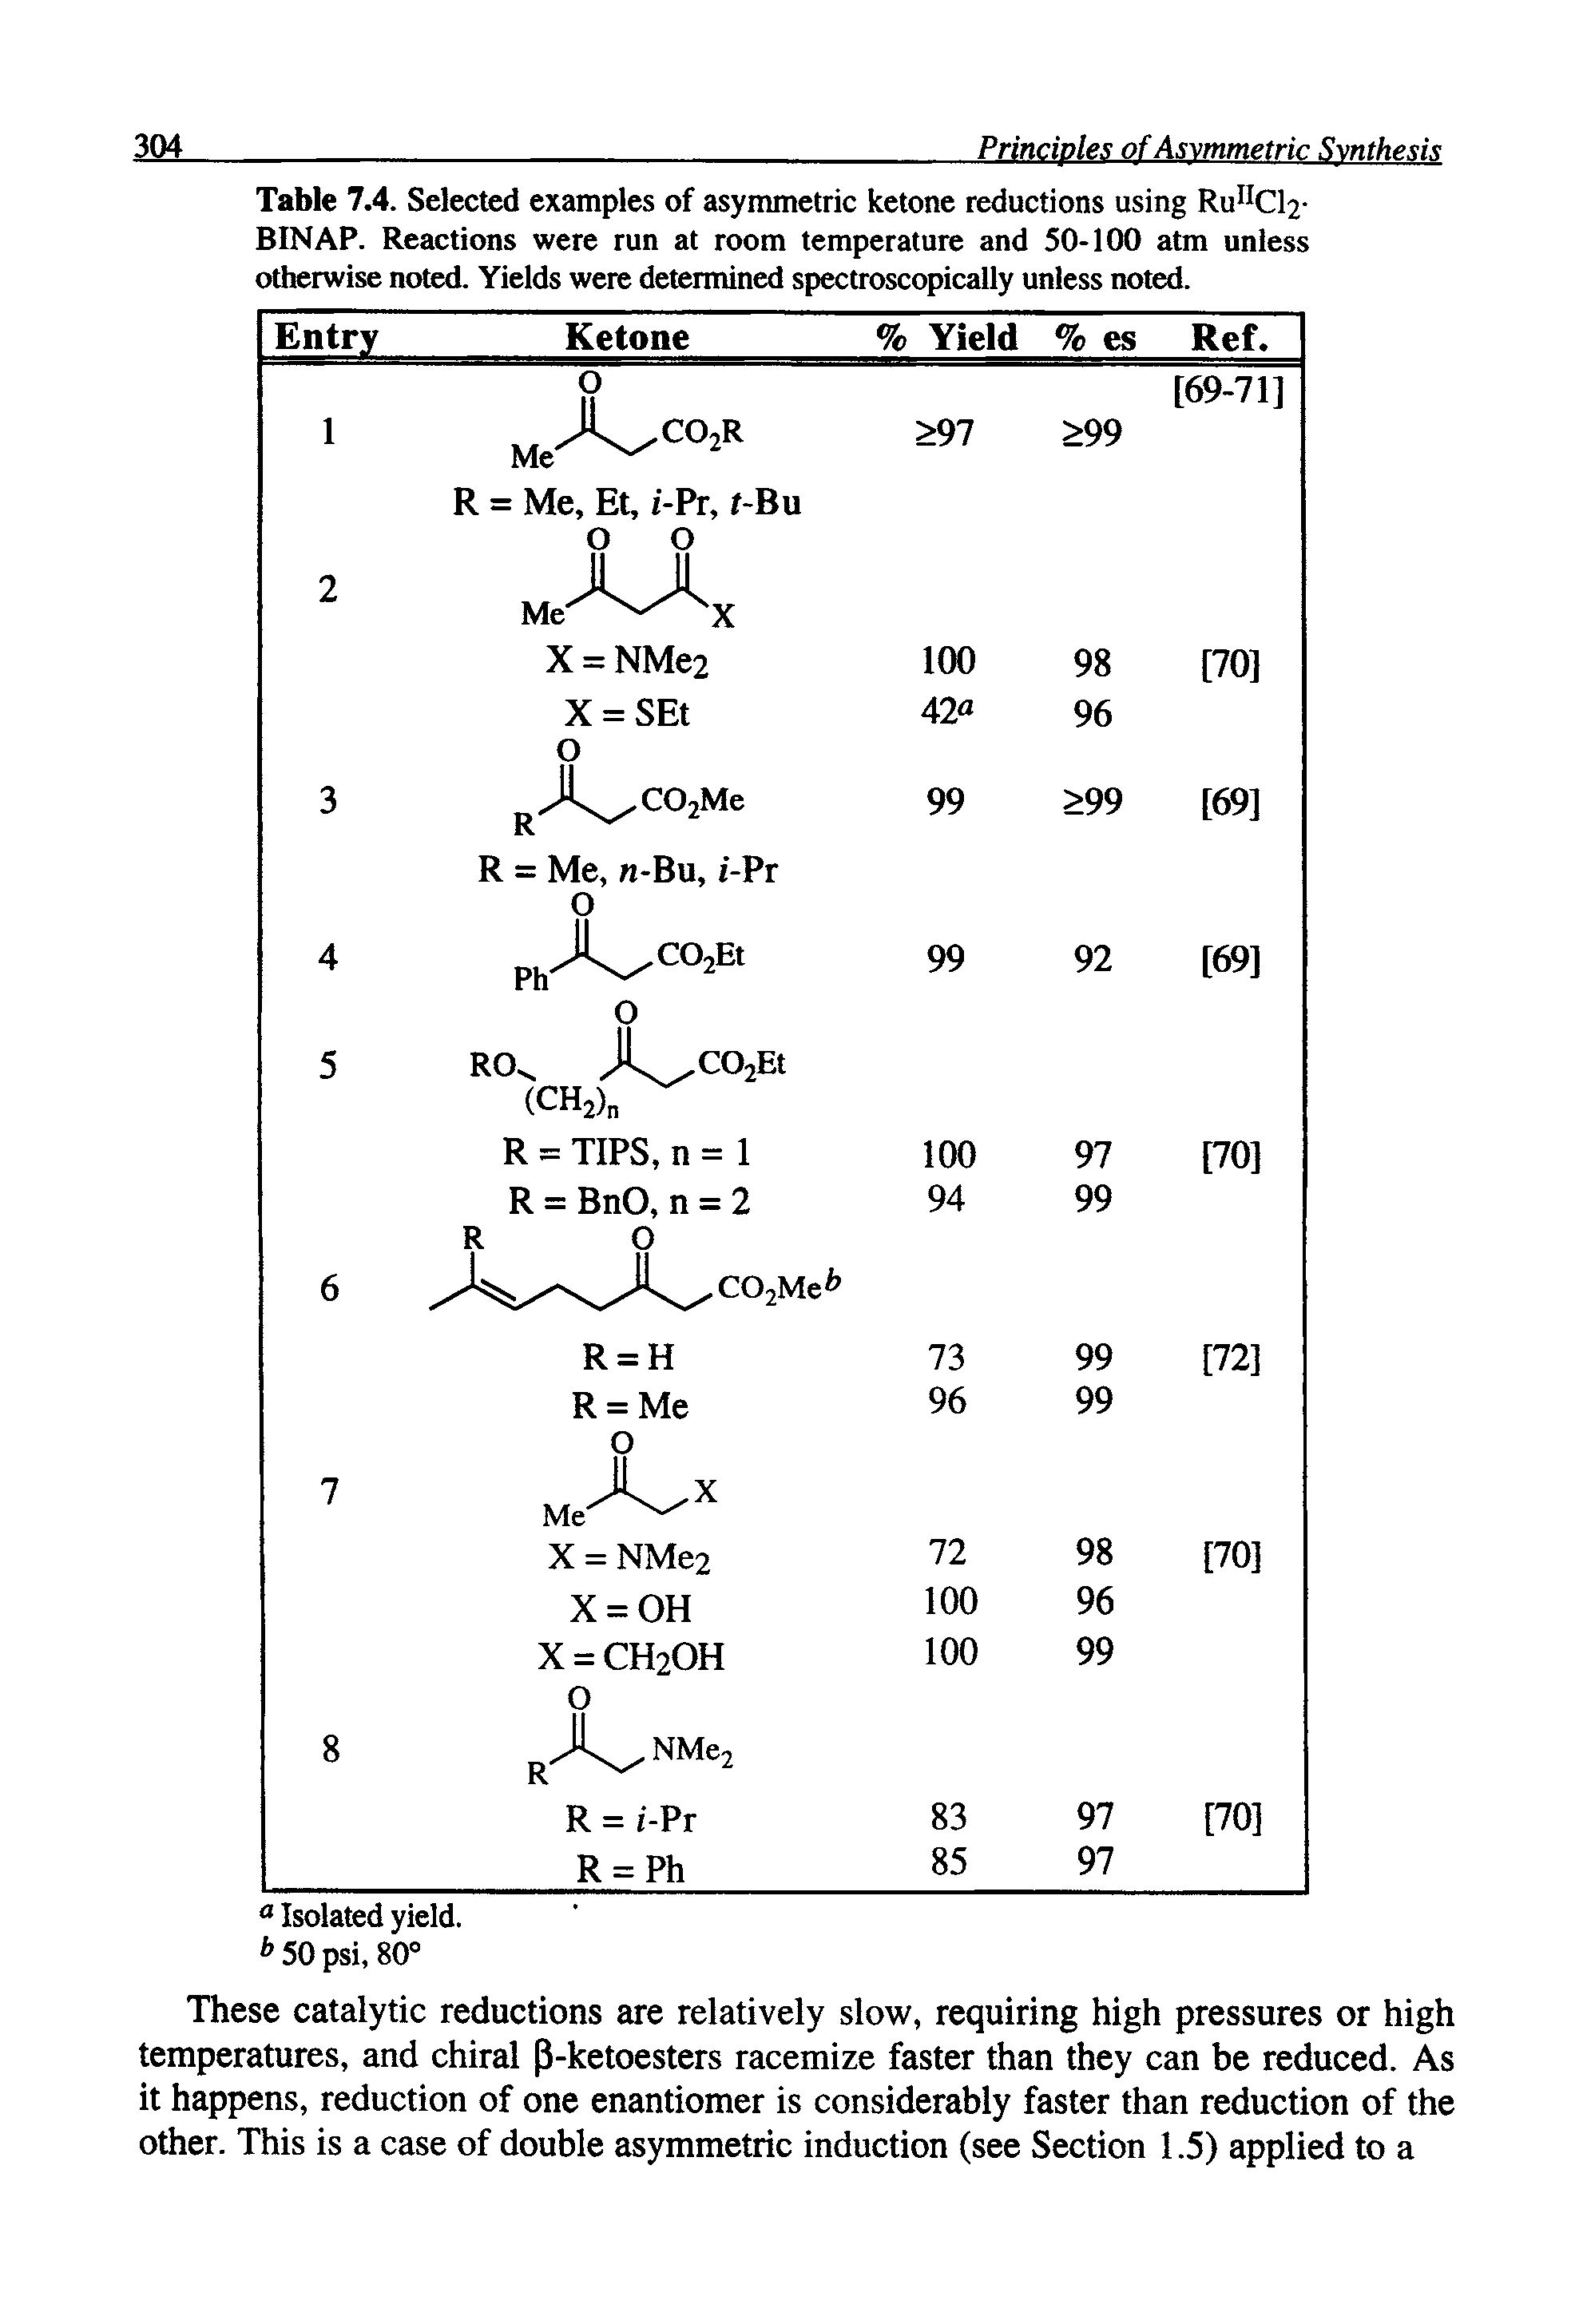 Table 7.4. Selected examples of asymmetric ketone reductions using Runci2-BINAP. Reactions were run at room temperature and 50-100 atm unless otherwise noted. Yields were determined spectroscopically unless noted.